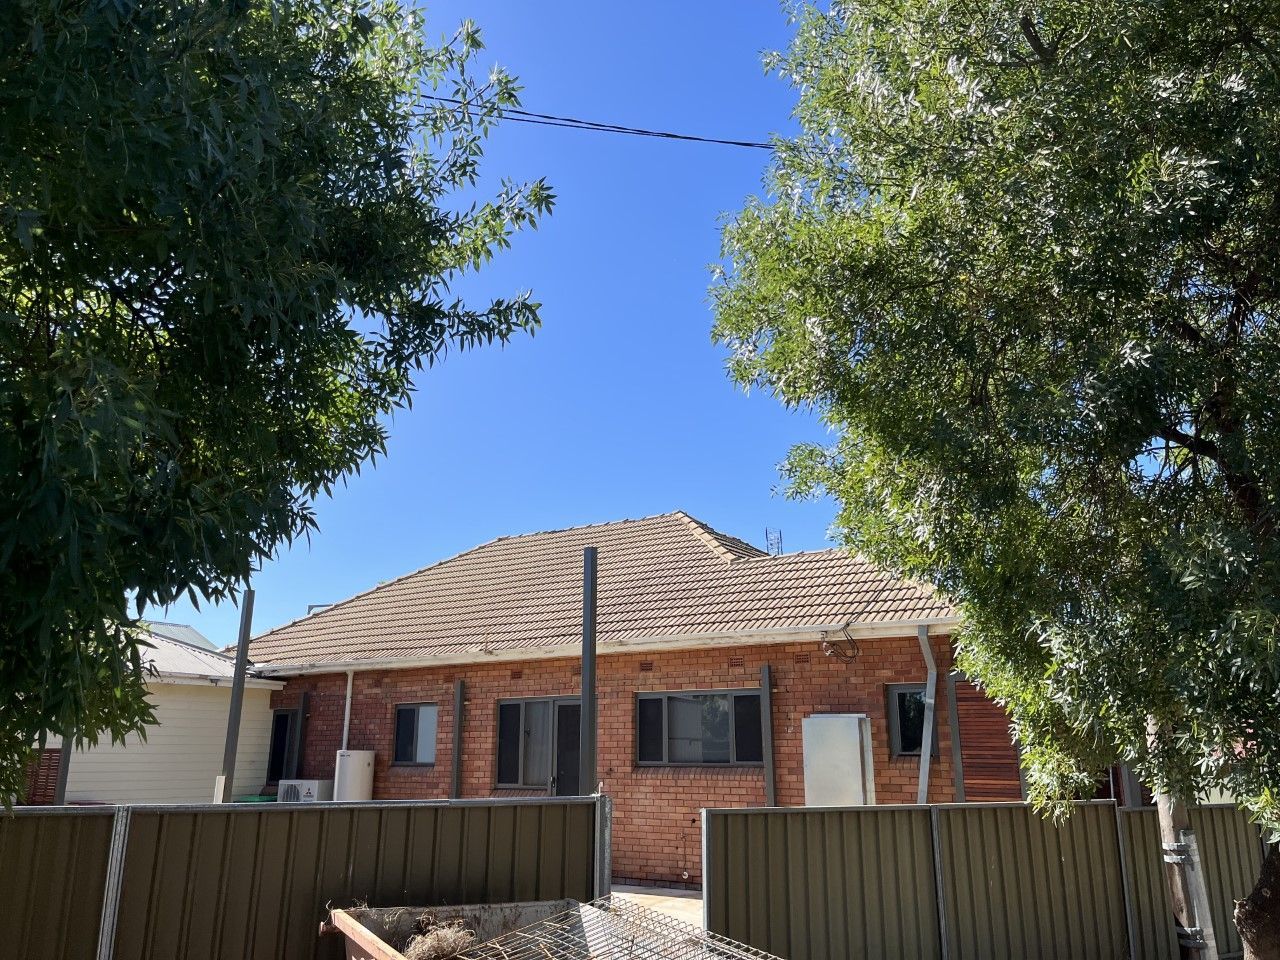 Worker on Roof at Works with Flex Tile — Roofer in Parkes, NSW